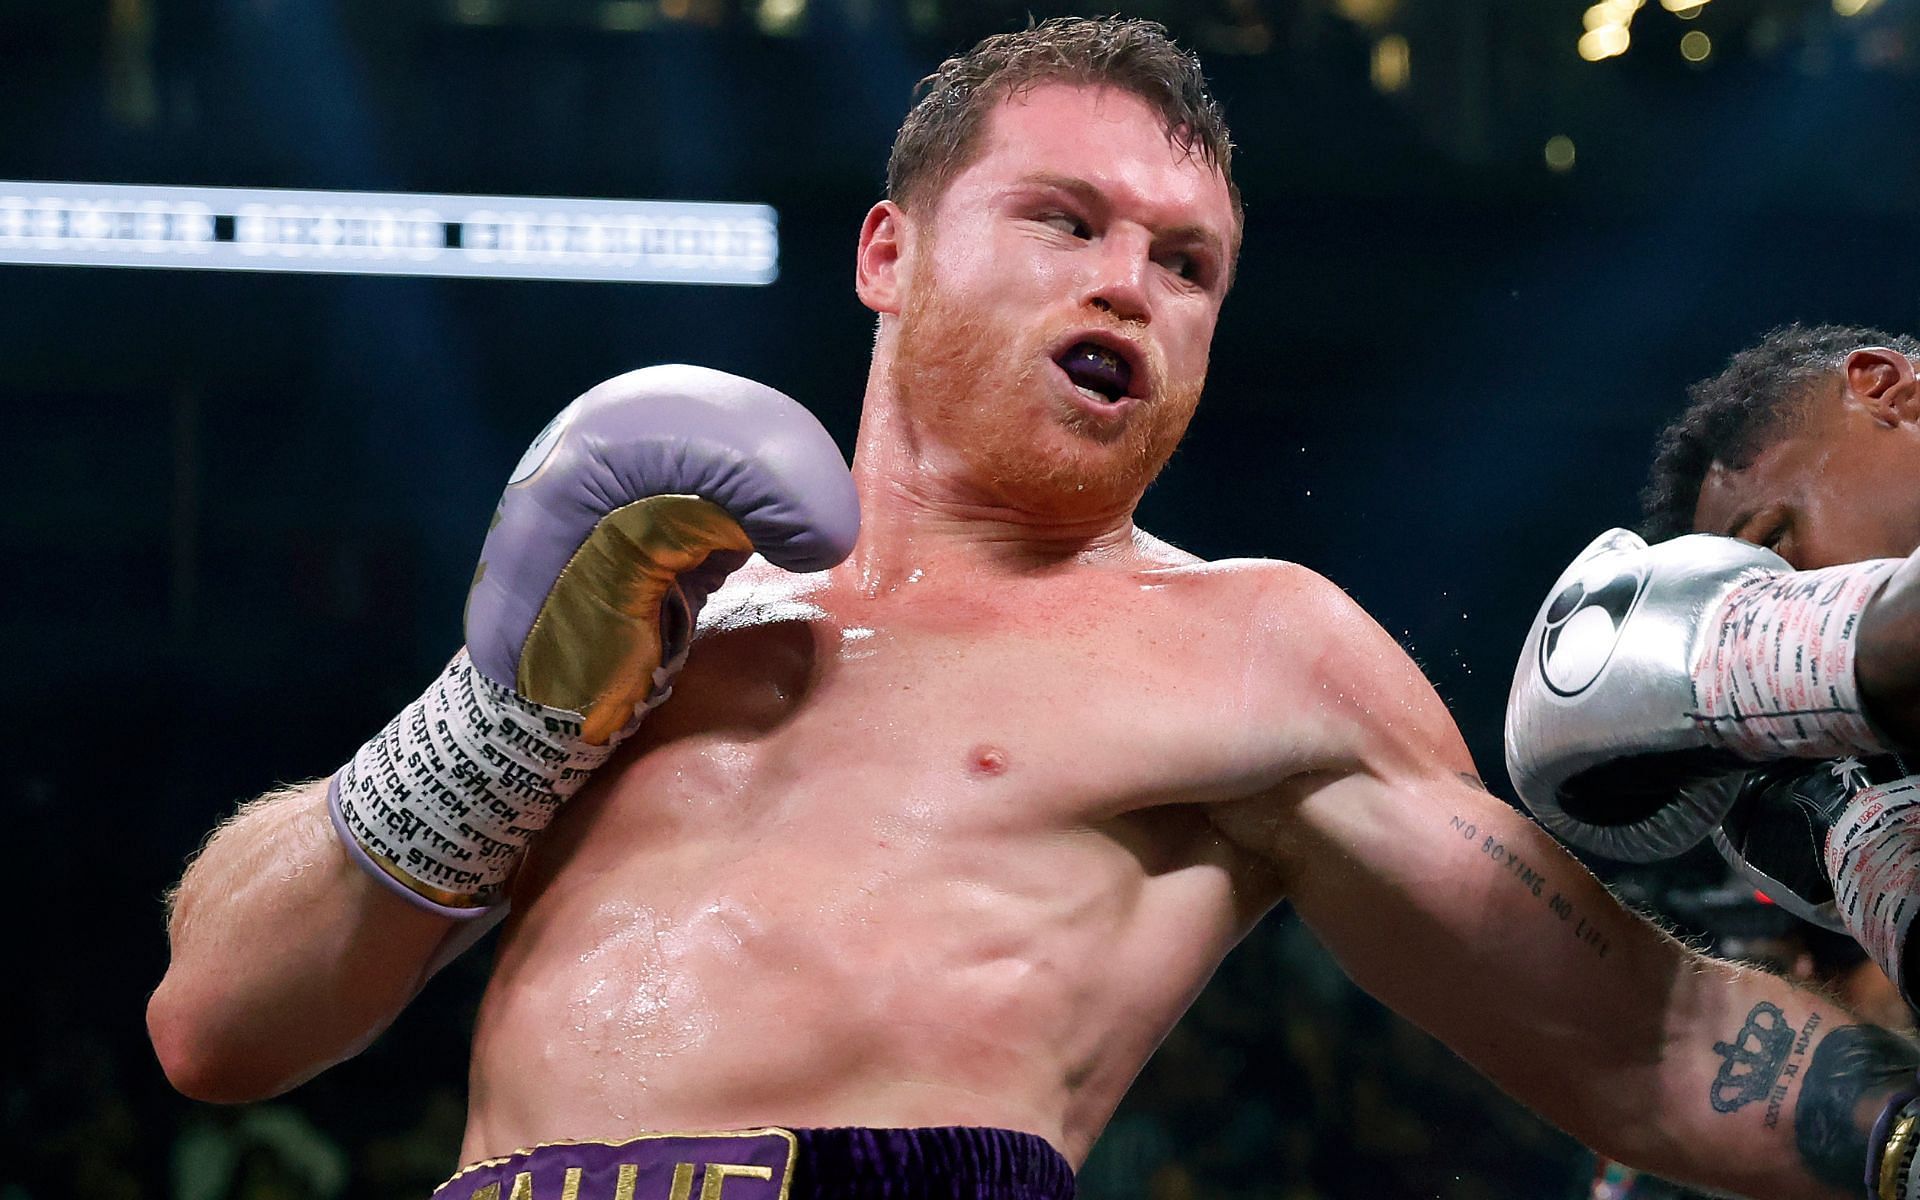 Saul Canelo Alvarez (inset) is regarded as one of the greatest boxers of all time [Image courtesy: Getty Images]